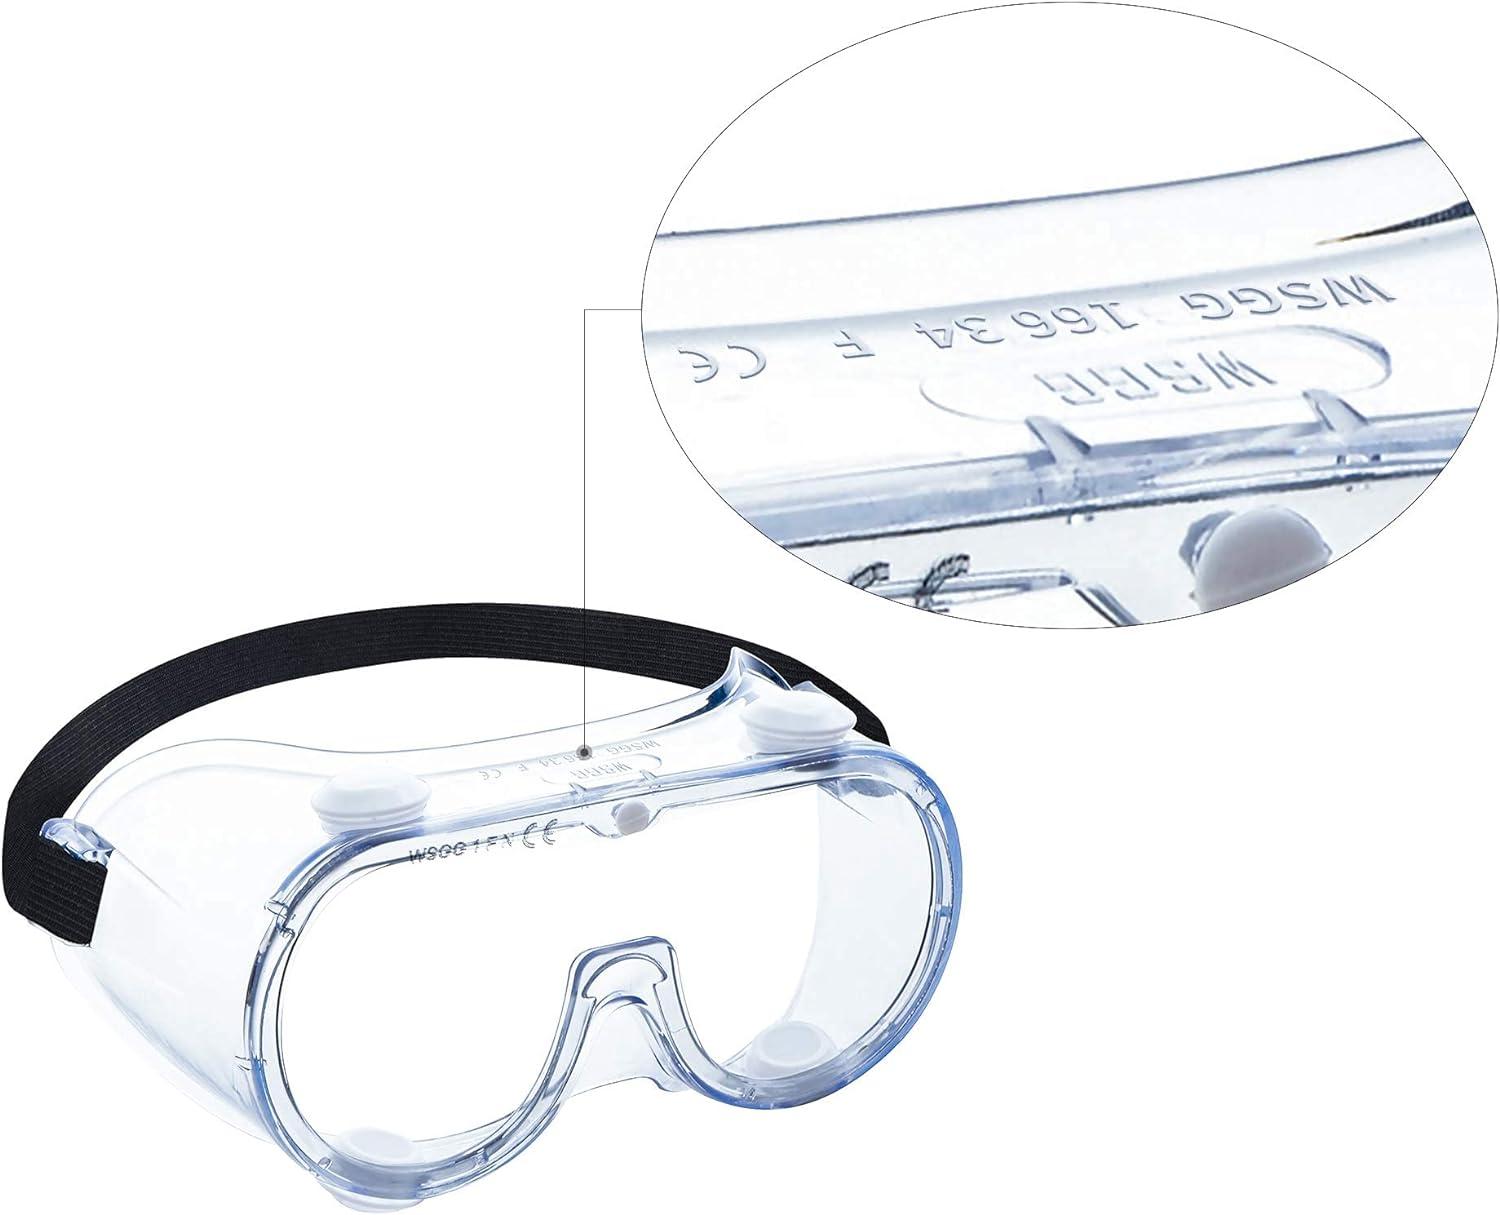 WSGG Medical Safety Goggles Fit Over Glasses for Men and Women FDA